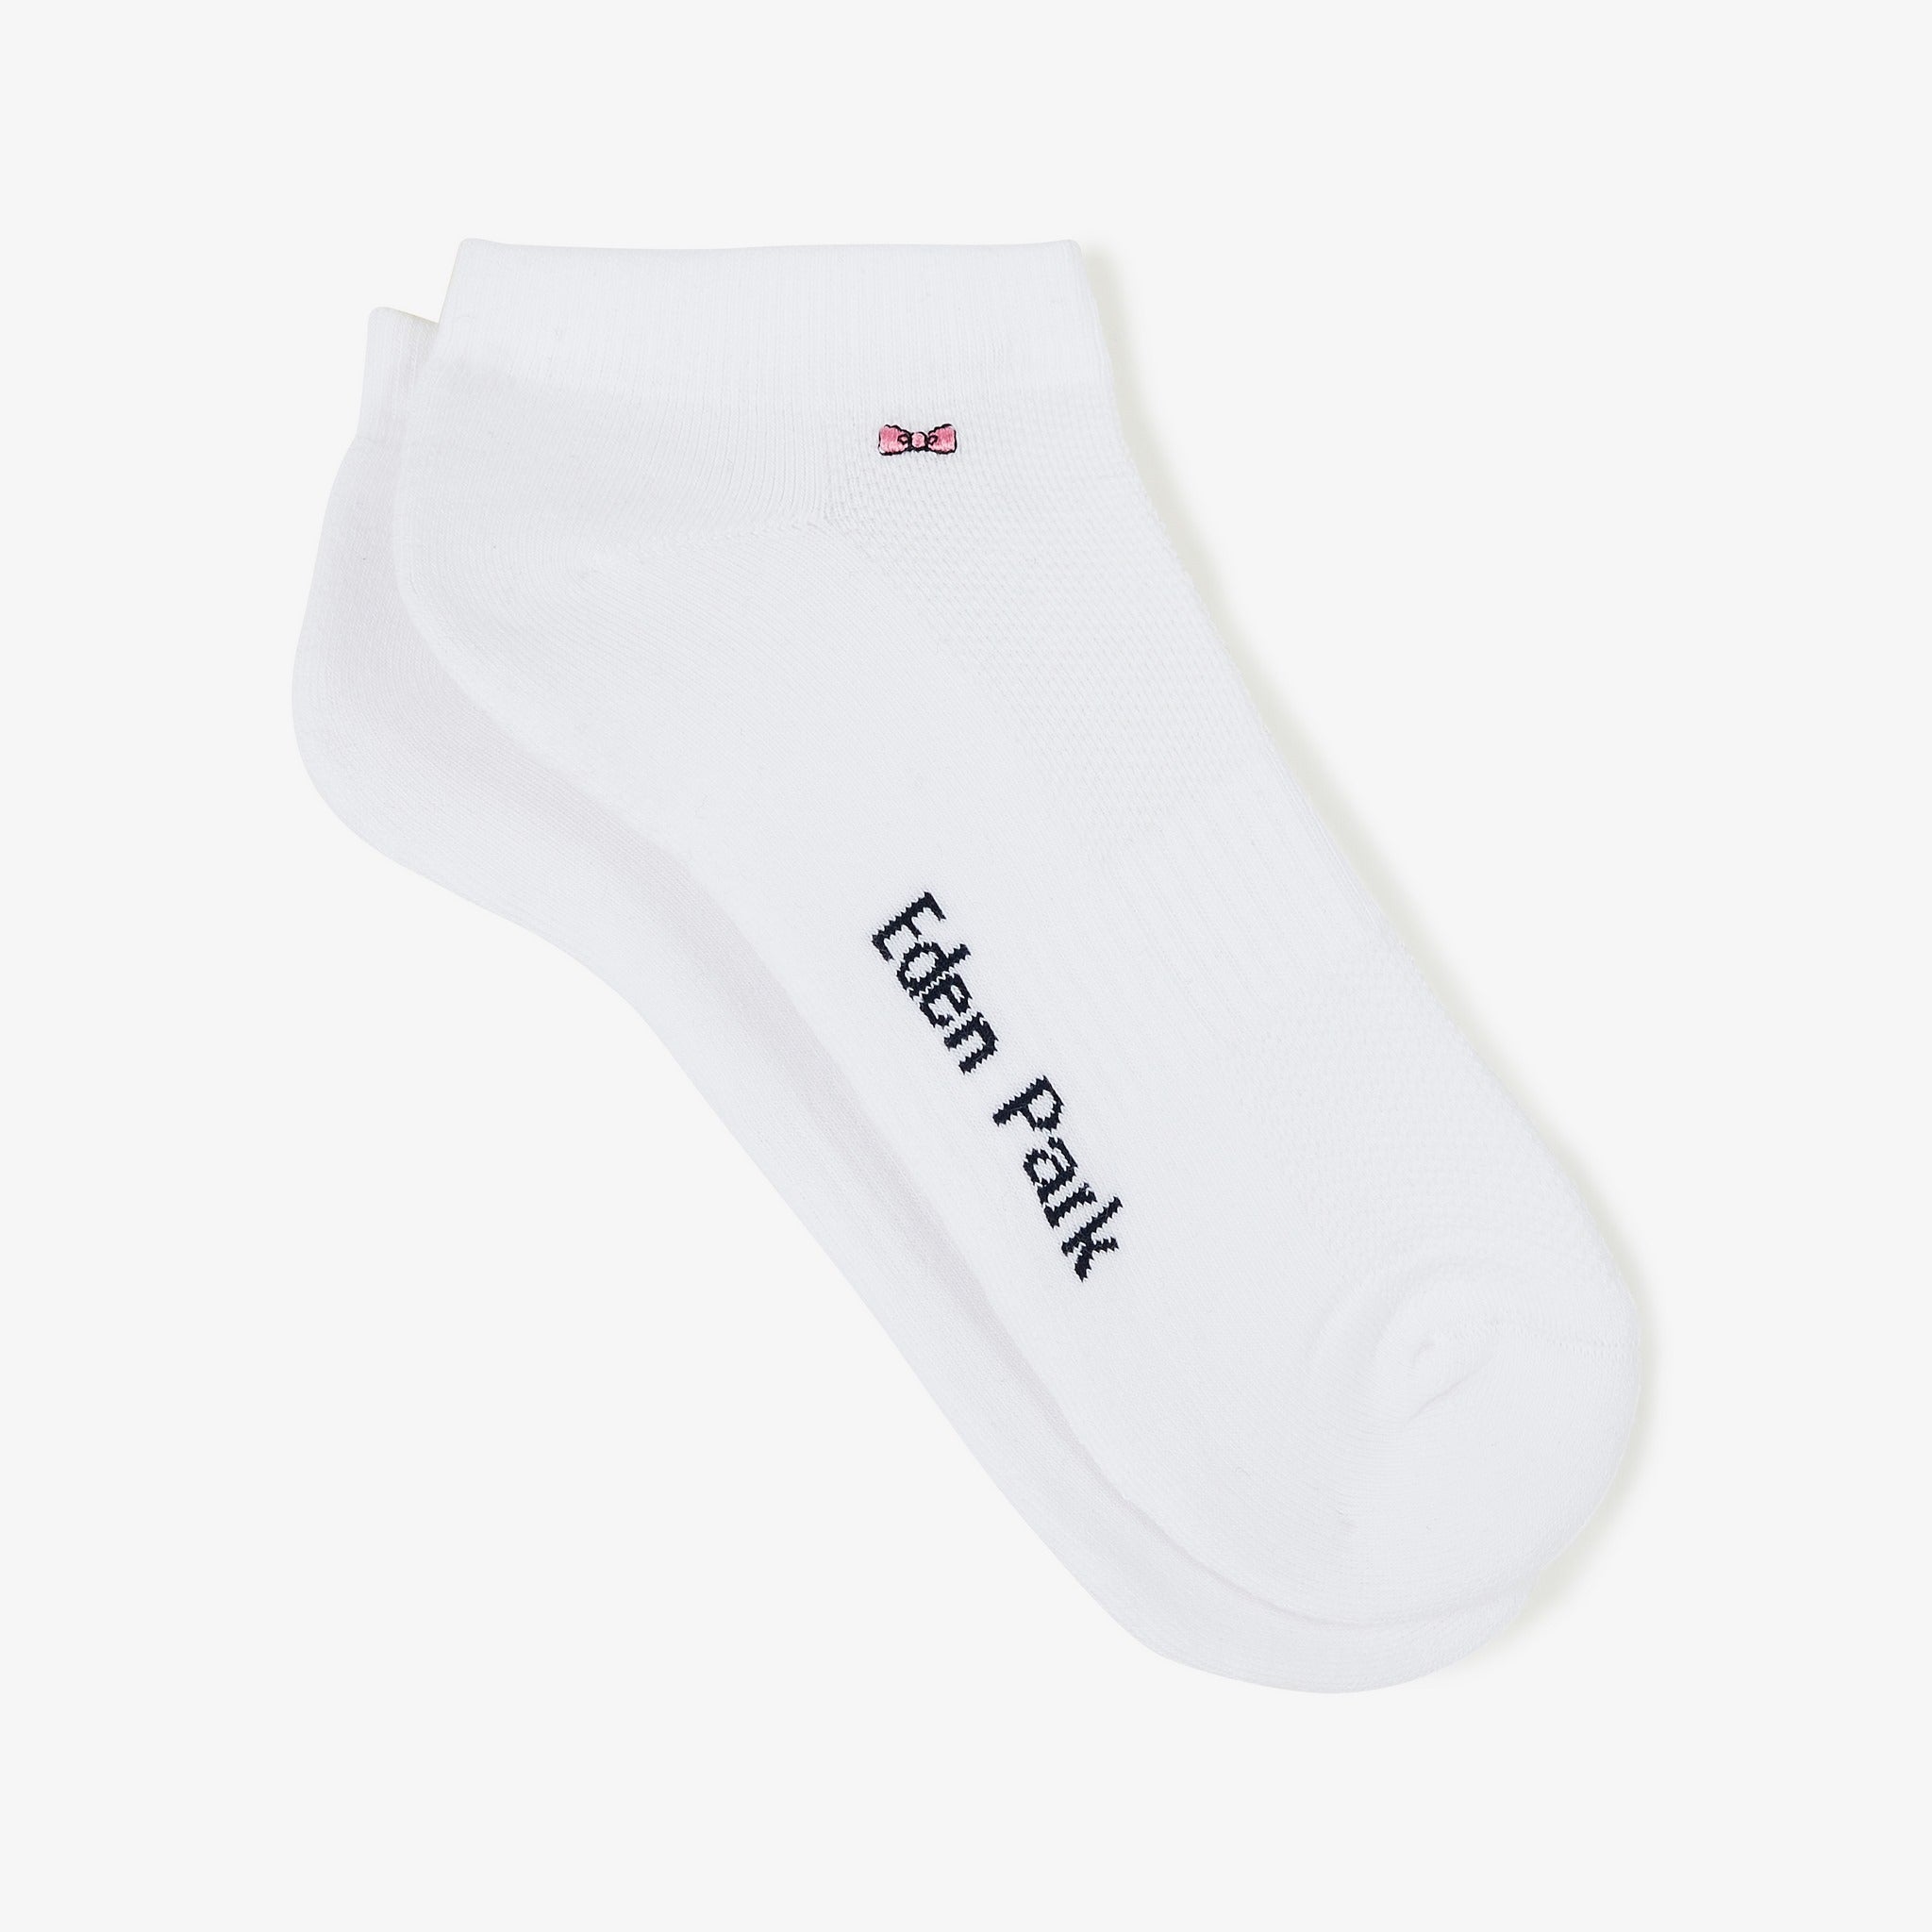 Chaussettes Blanches HEXXEE 2 Bandes